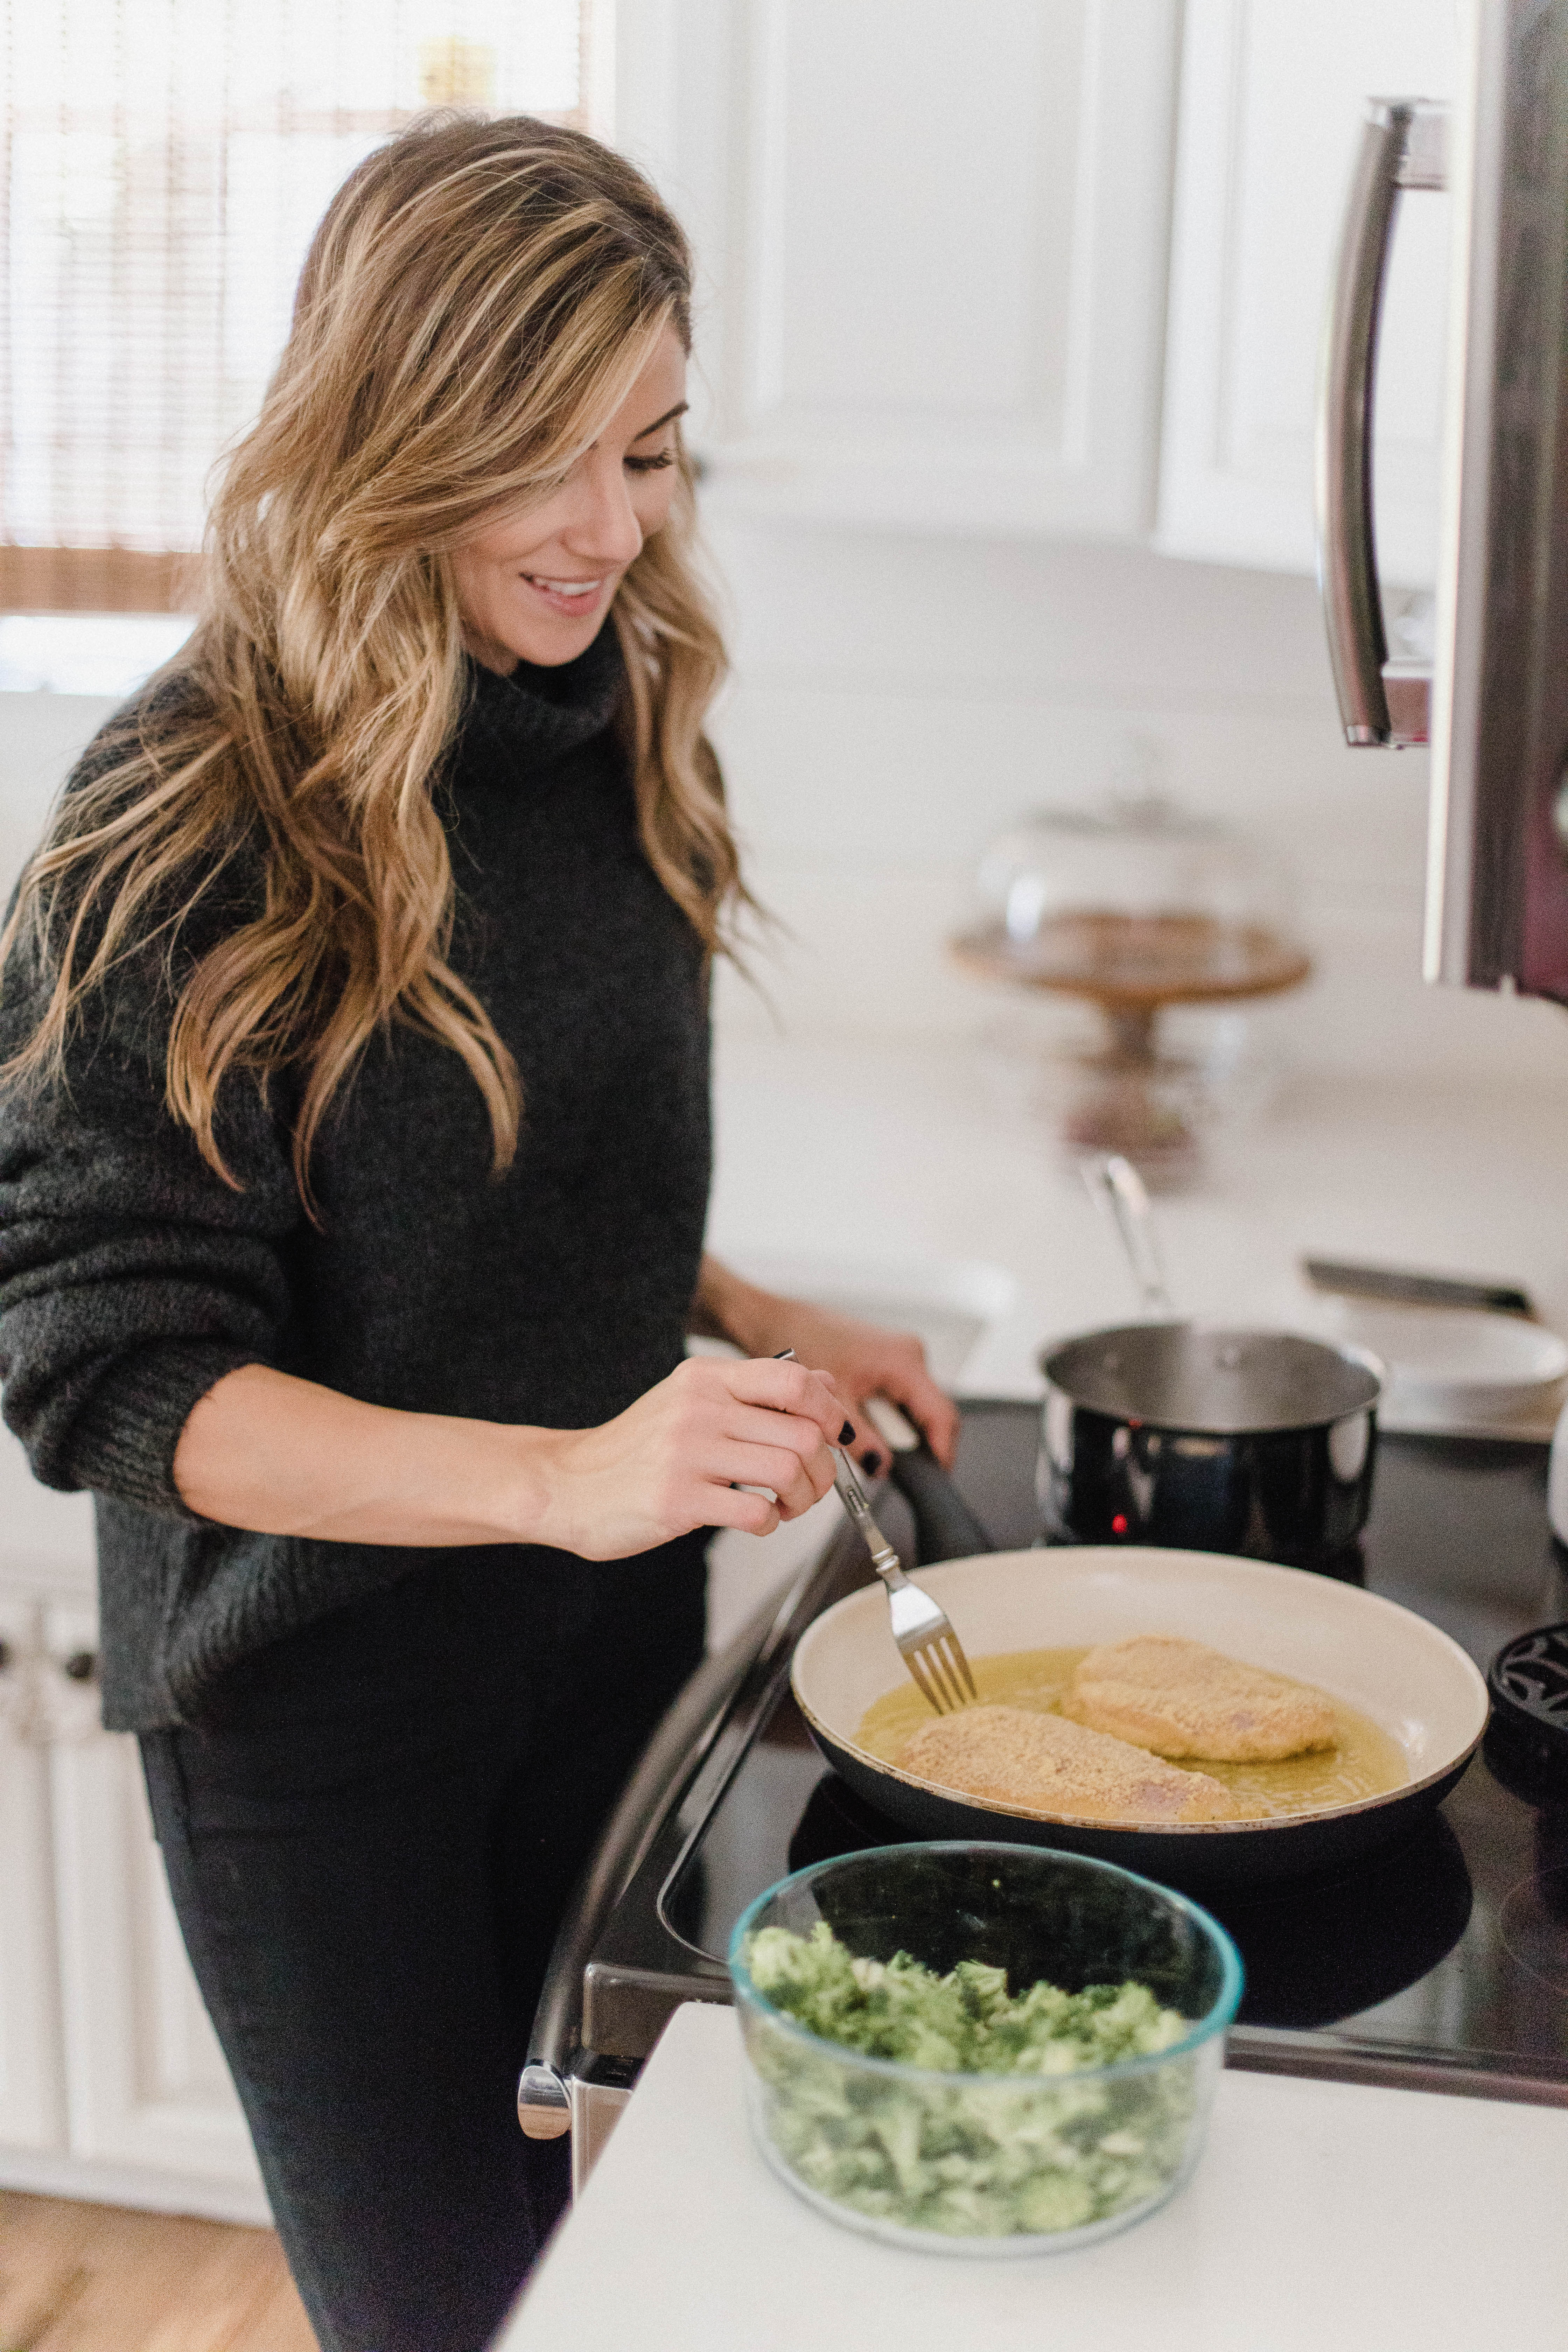 Life and style blogger Lauren McBride shares her Home Chef Meal Makeover Challenge Results, including a review on the meals and what she's learned from the process. 